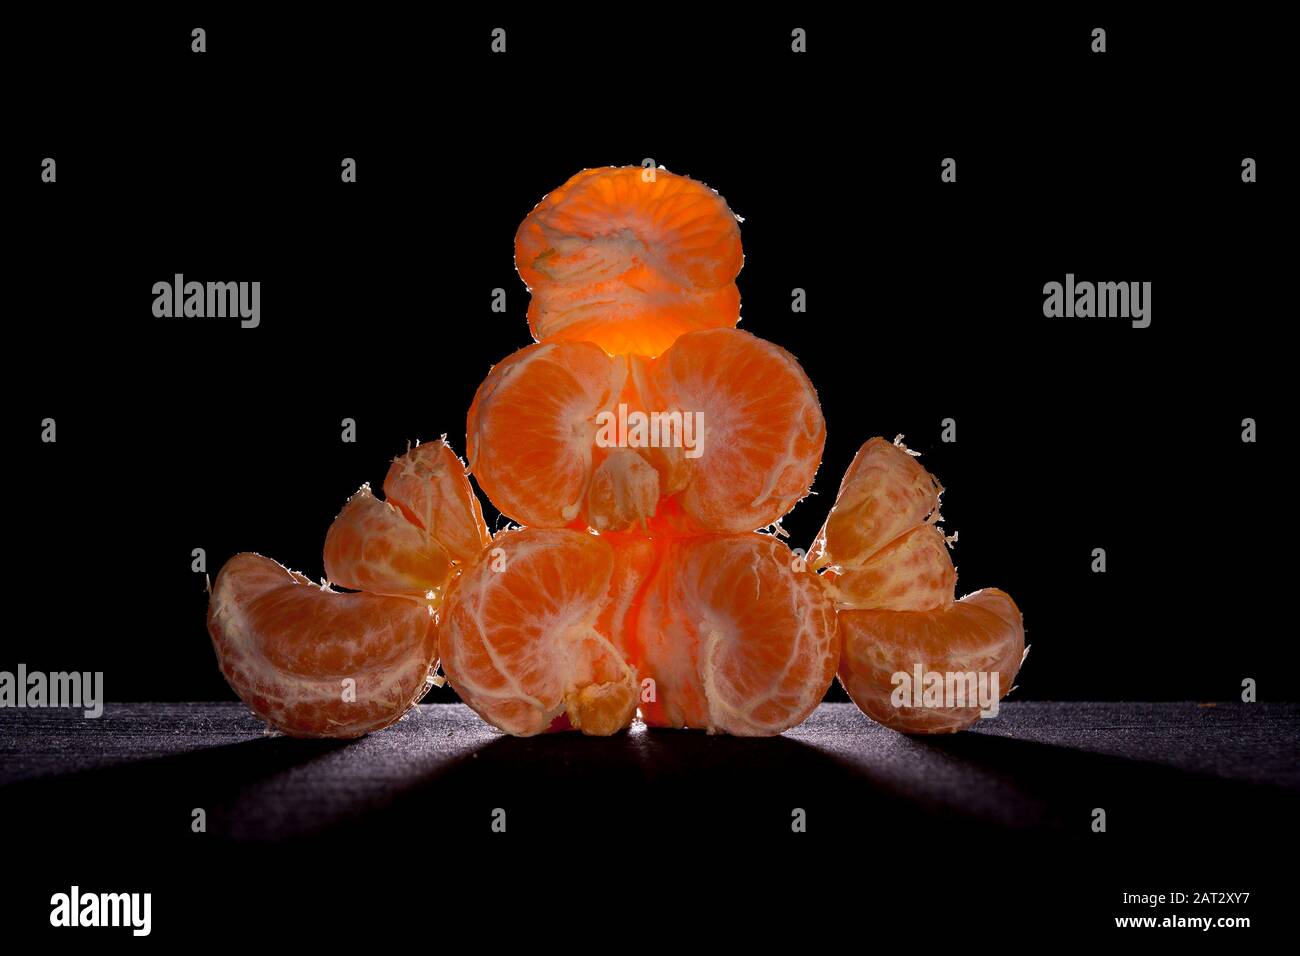 oranges tangerine,citrus reticula.on table with black background and back light still life .mandarin variety orange contains pomelo and c vitamin. Stock Photo